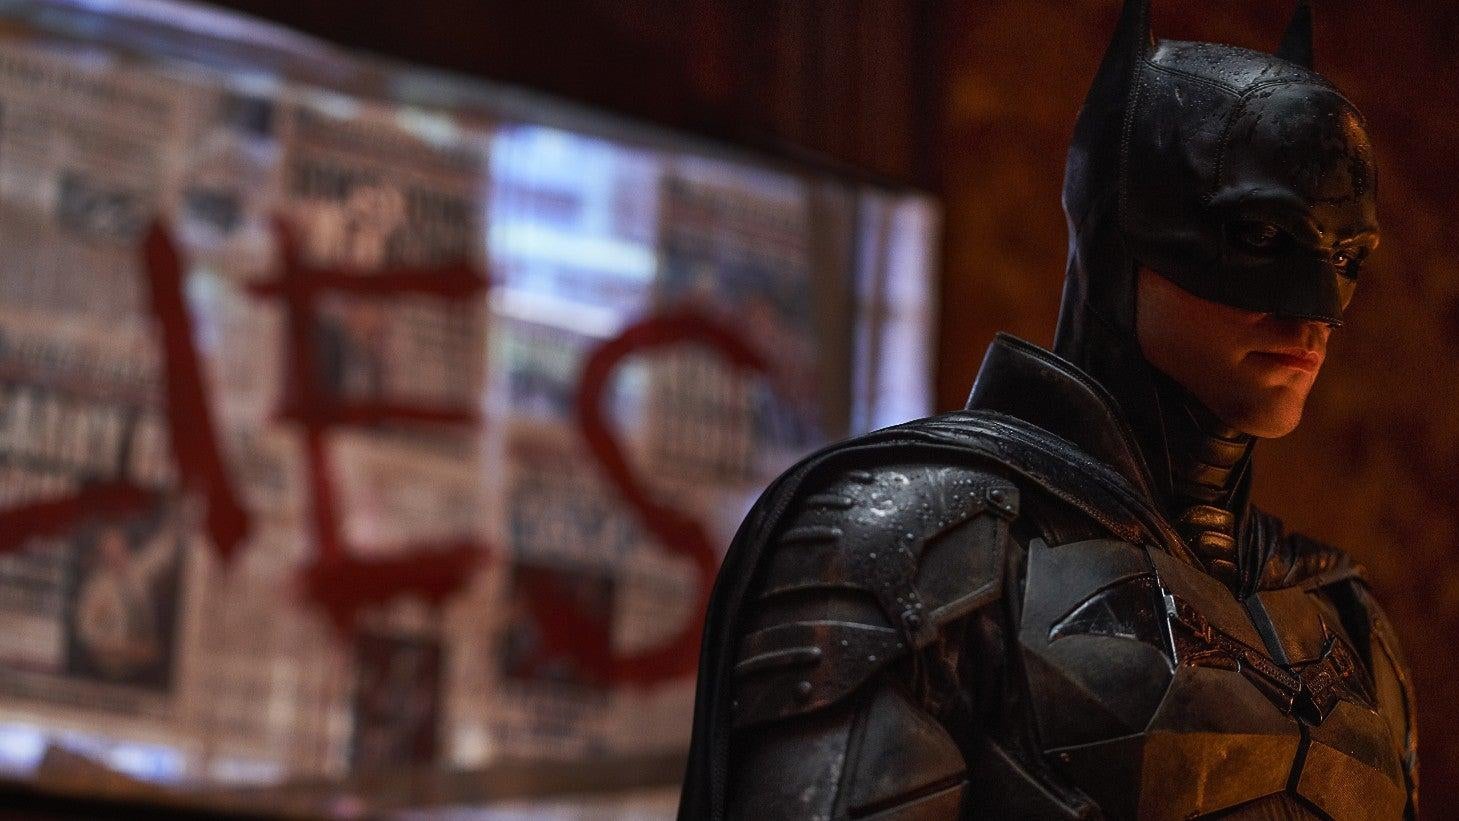 Am I telling you lies about The Batman? You'll have to let us know. (Image: Warner Bros.)